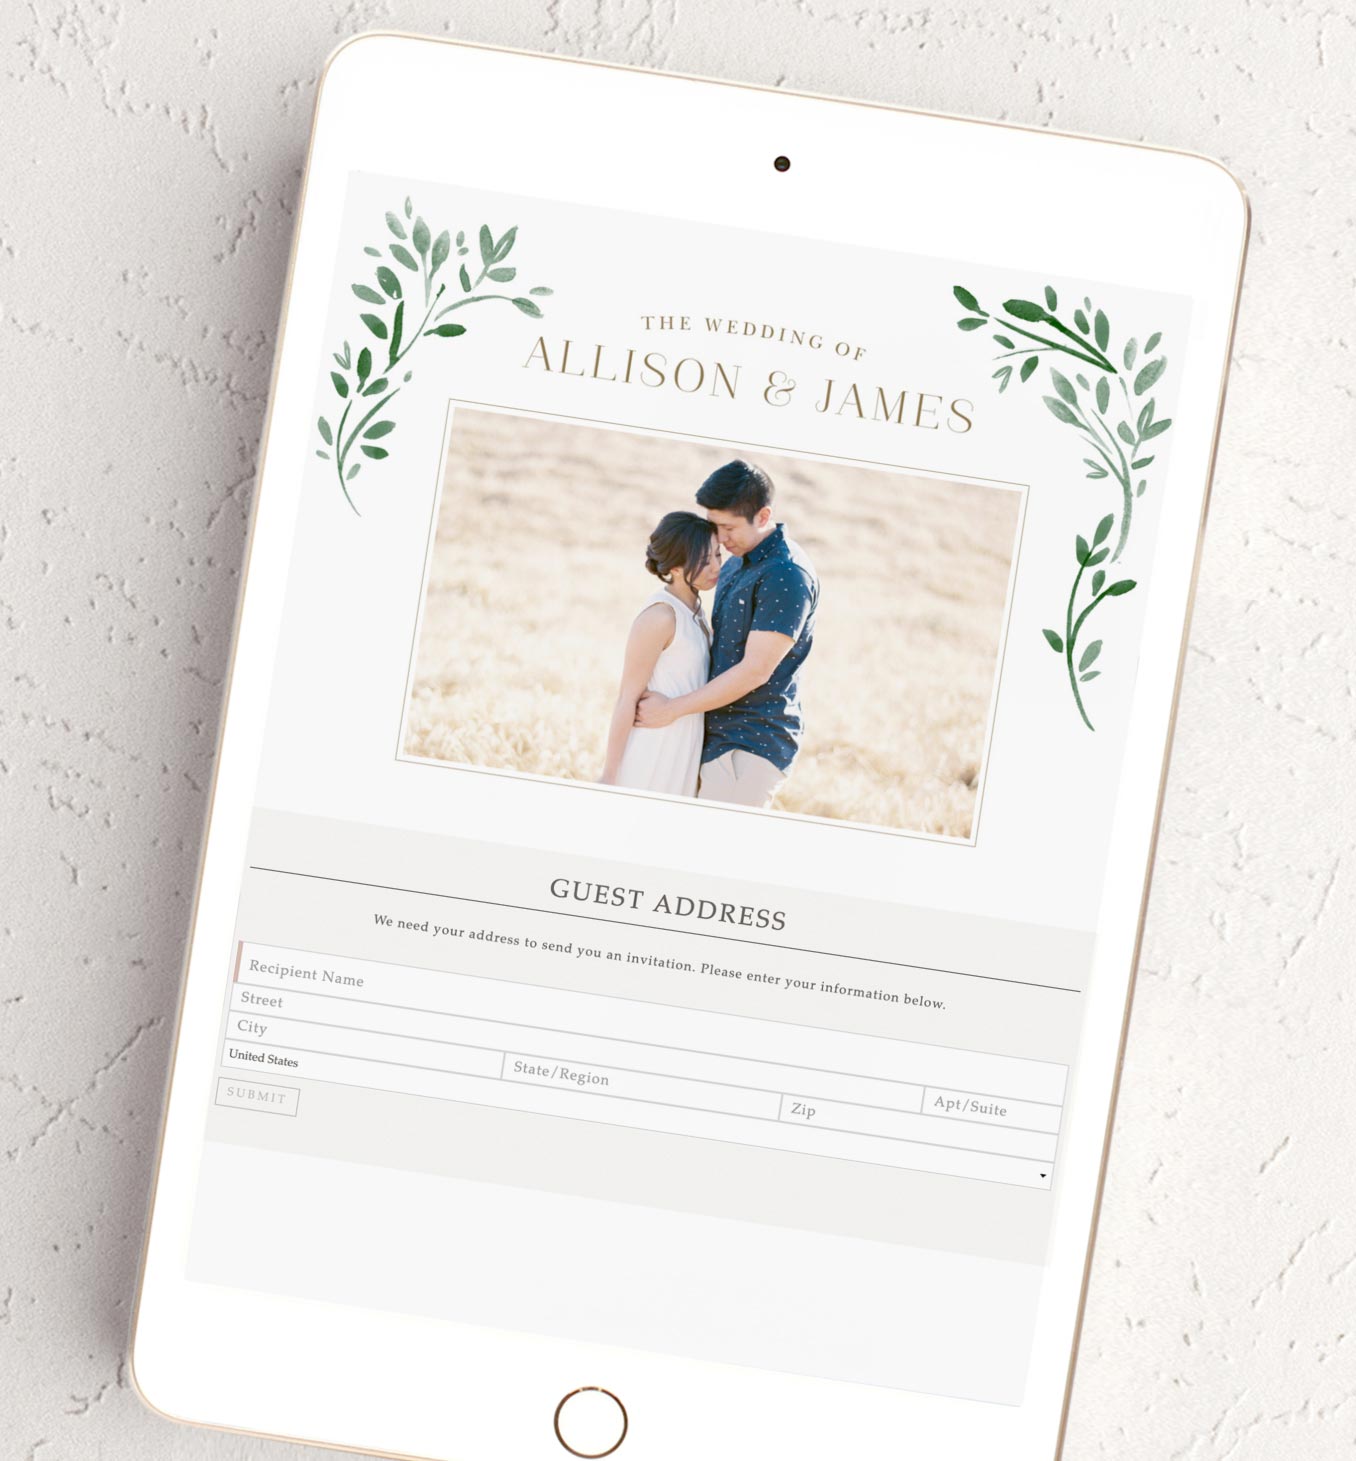 Automatic Address Capturing The Perfect Wedding Invites For Your Wedding - 4